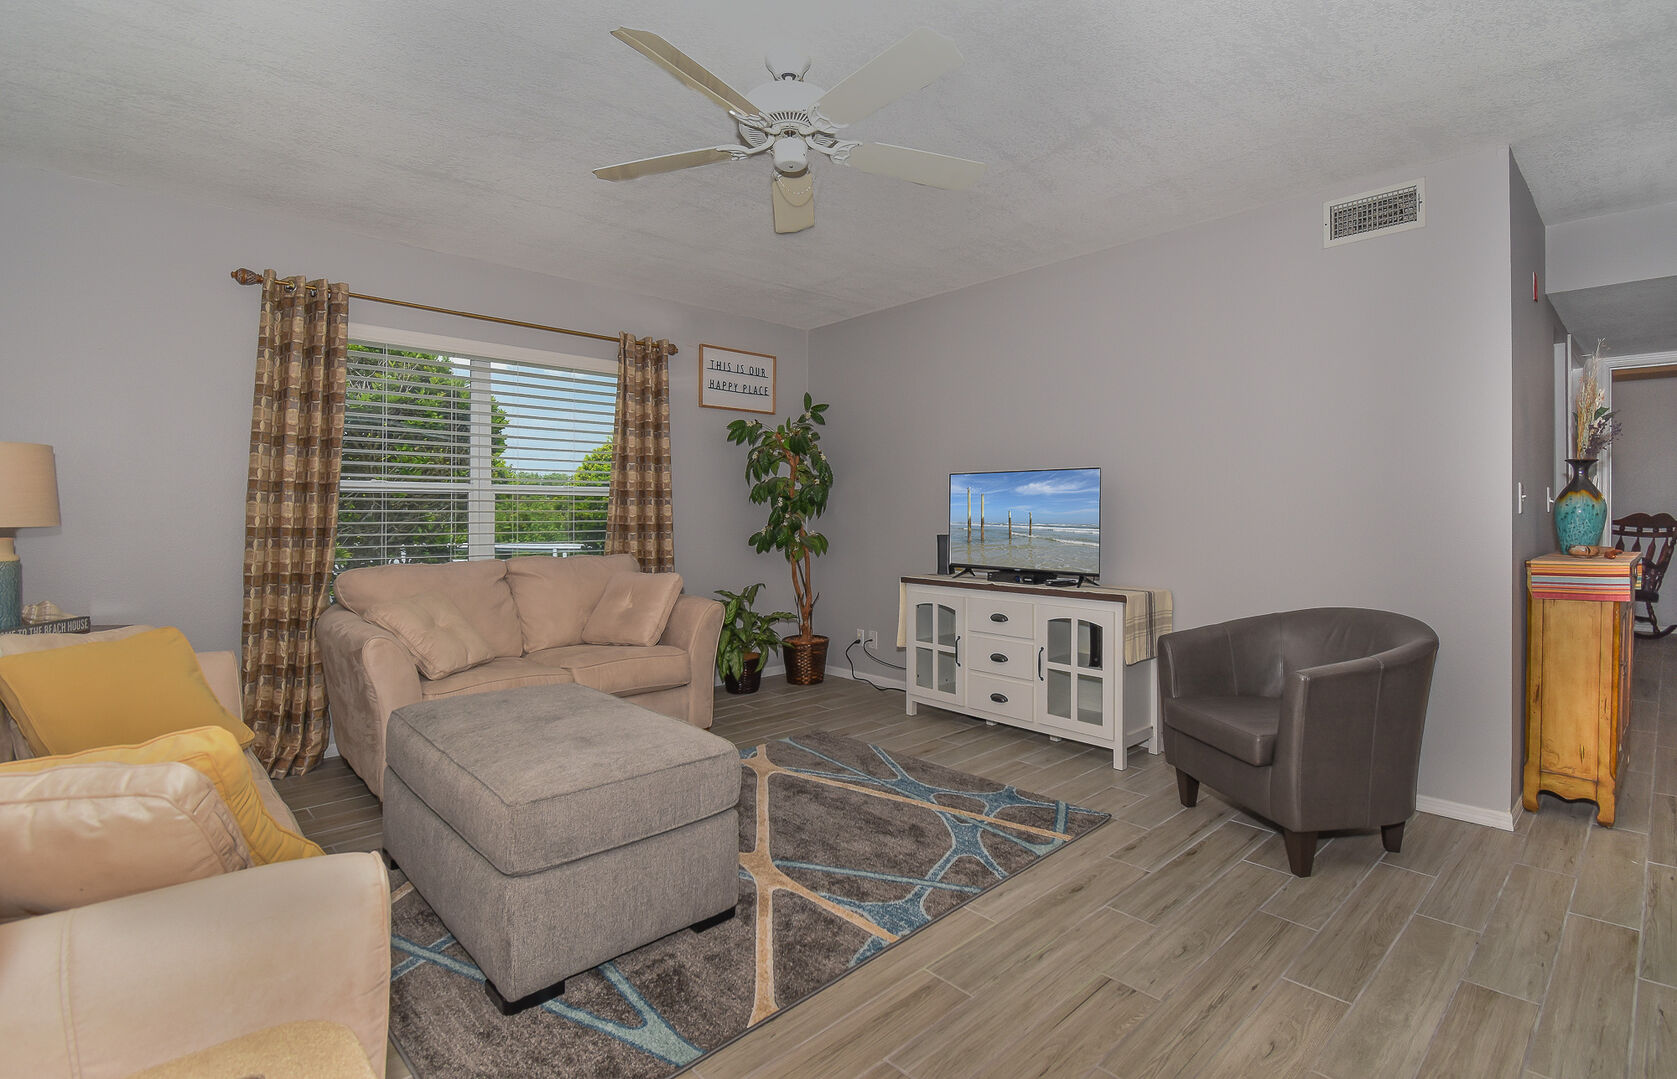 Plenty of room to relax in our condo rental in New Smyrna Beach